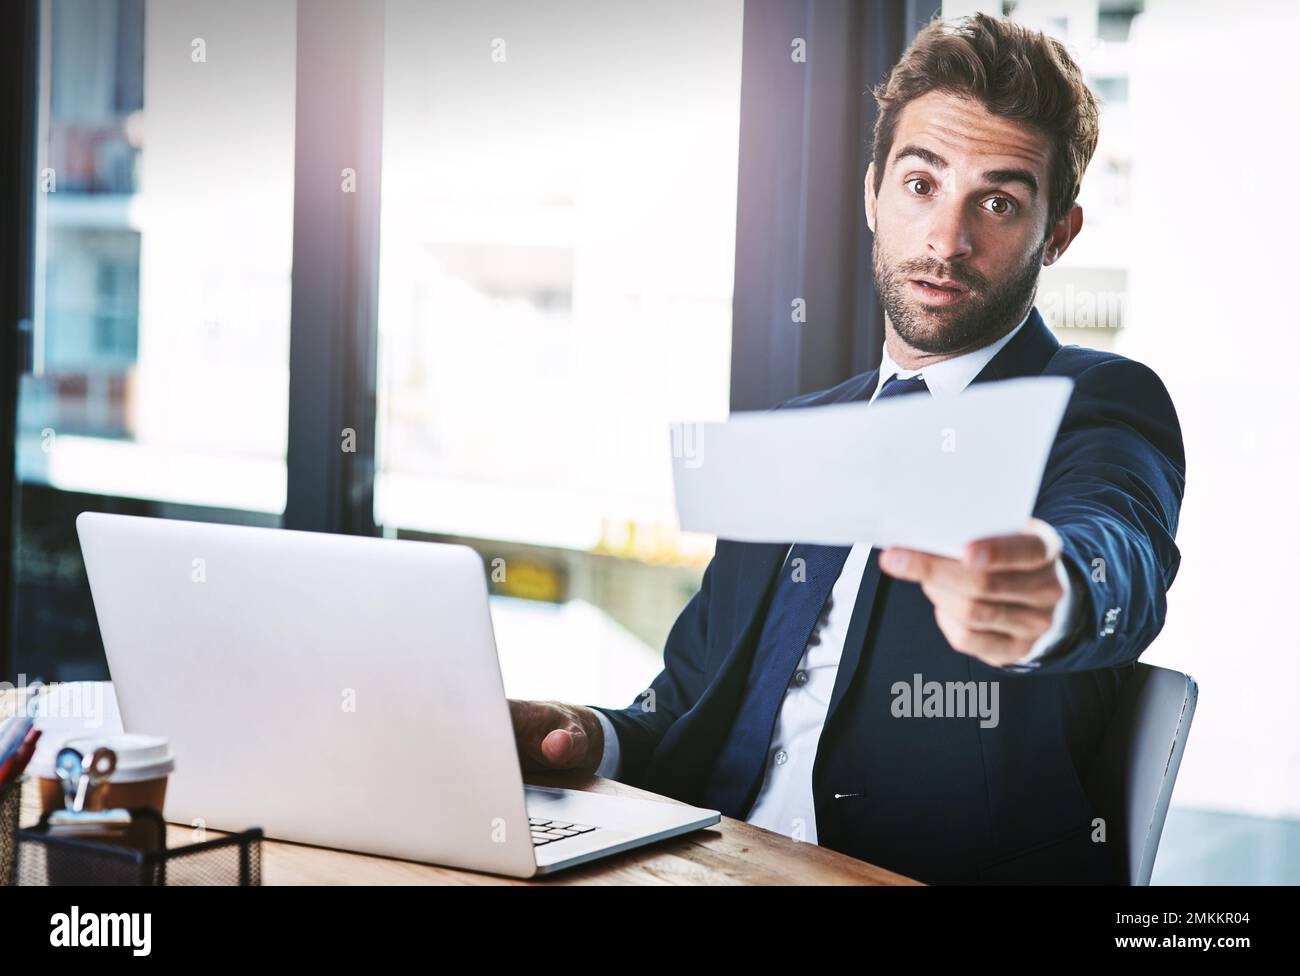 Get this done, now. Cropped portrait of a handsome young businessman looking serious while handing you a document. Stock Photo